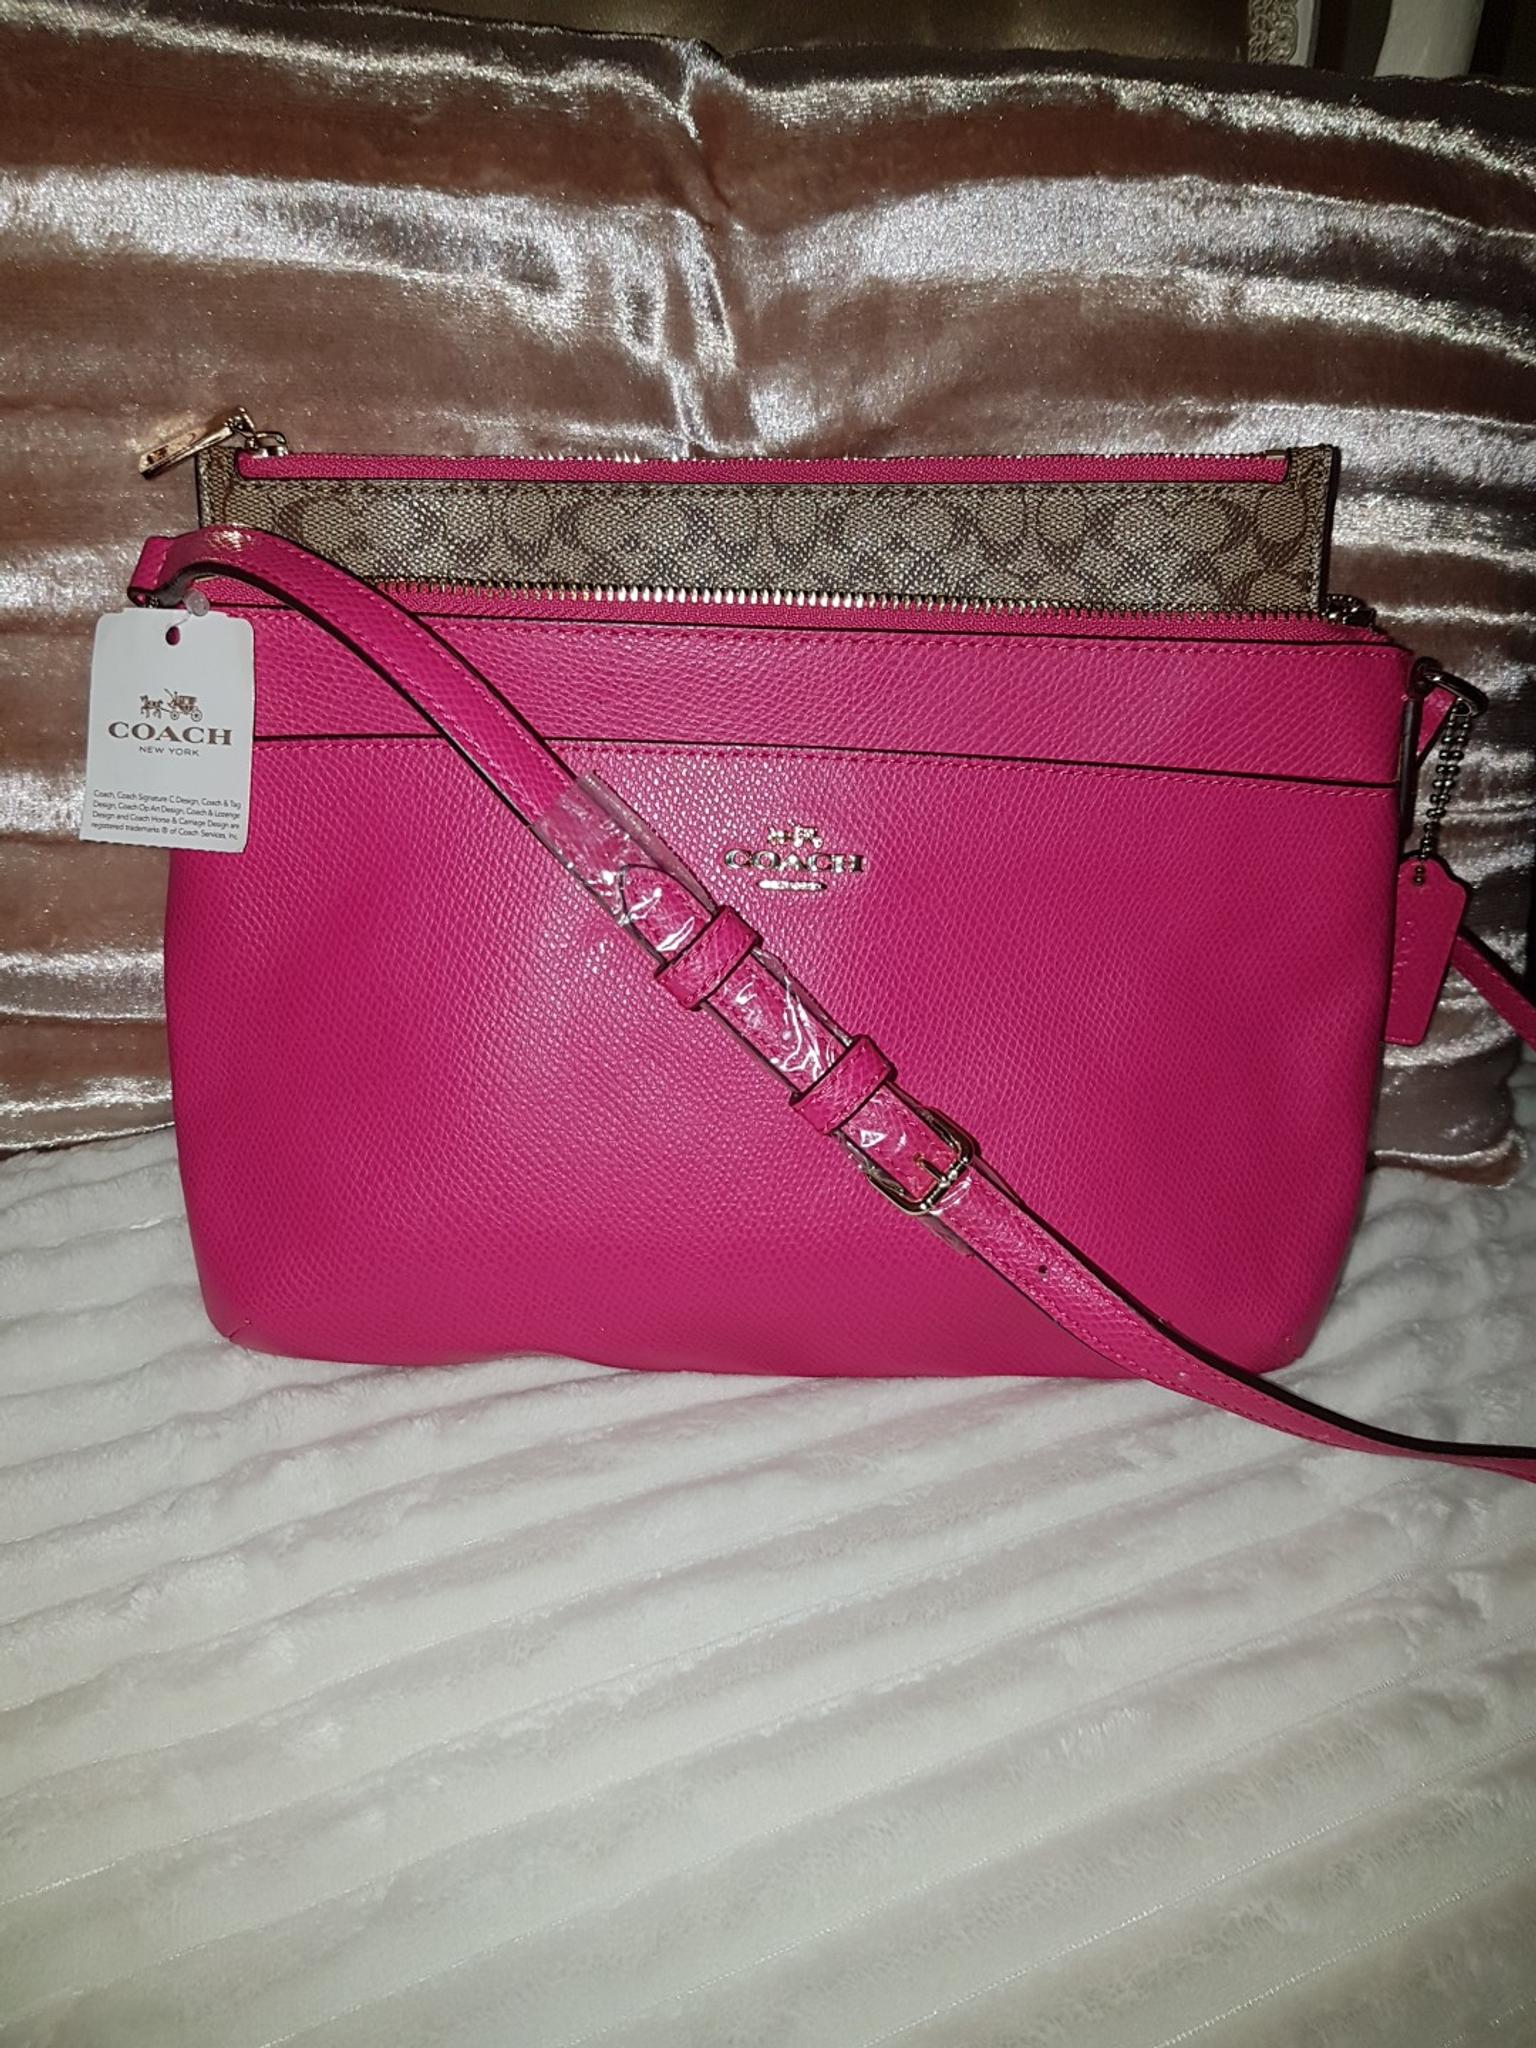 New with tags Coach Hot Pink Crossbody Bag in HX2 Calderdale for £50.00 for sale | Shpock